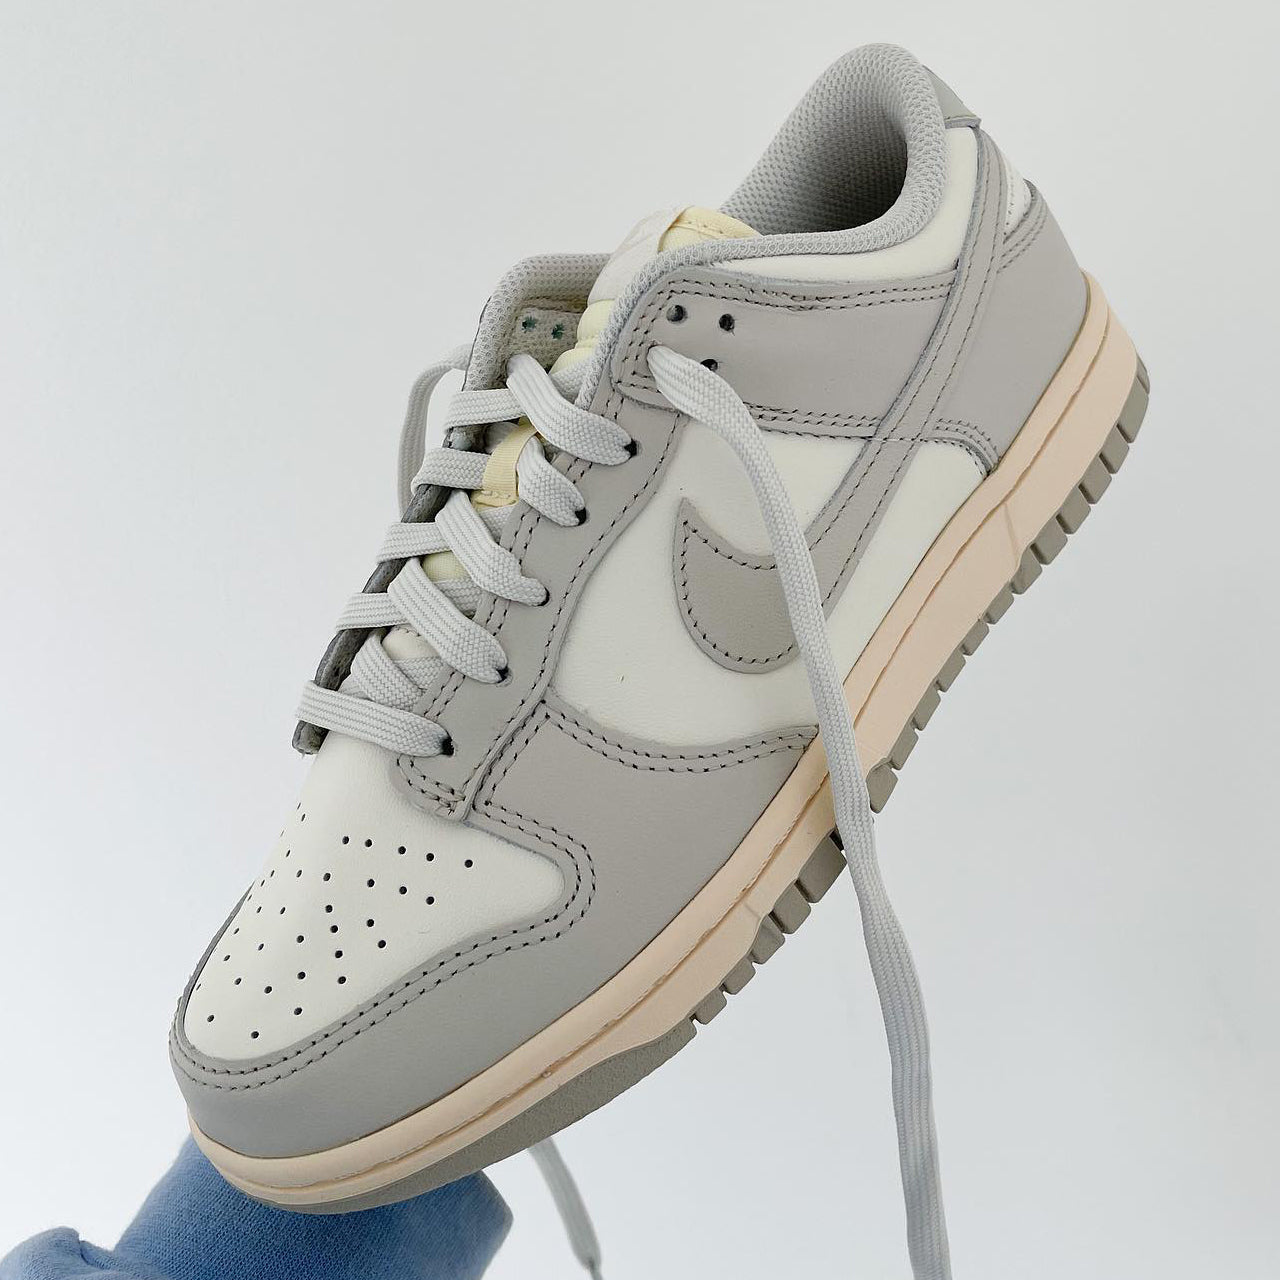 NIKE Dunk SB low top stitching color couple's casual shoes sneakers